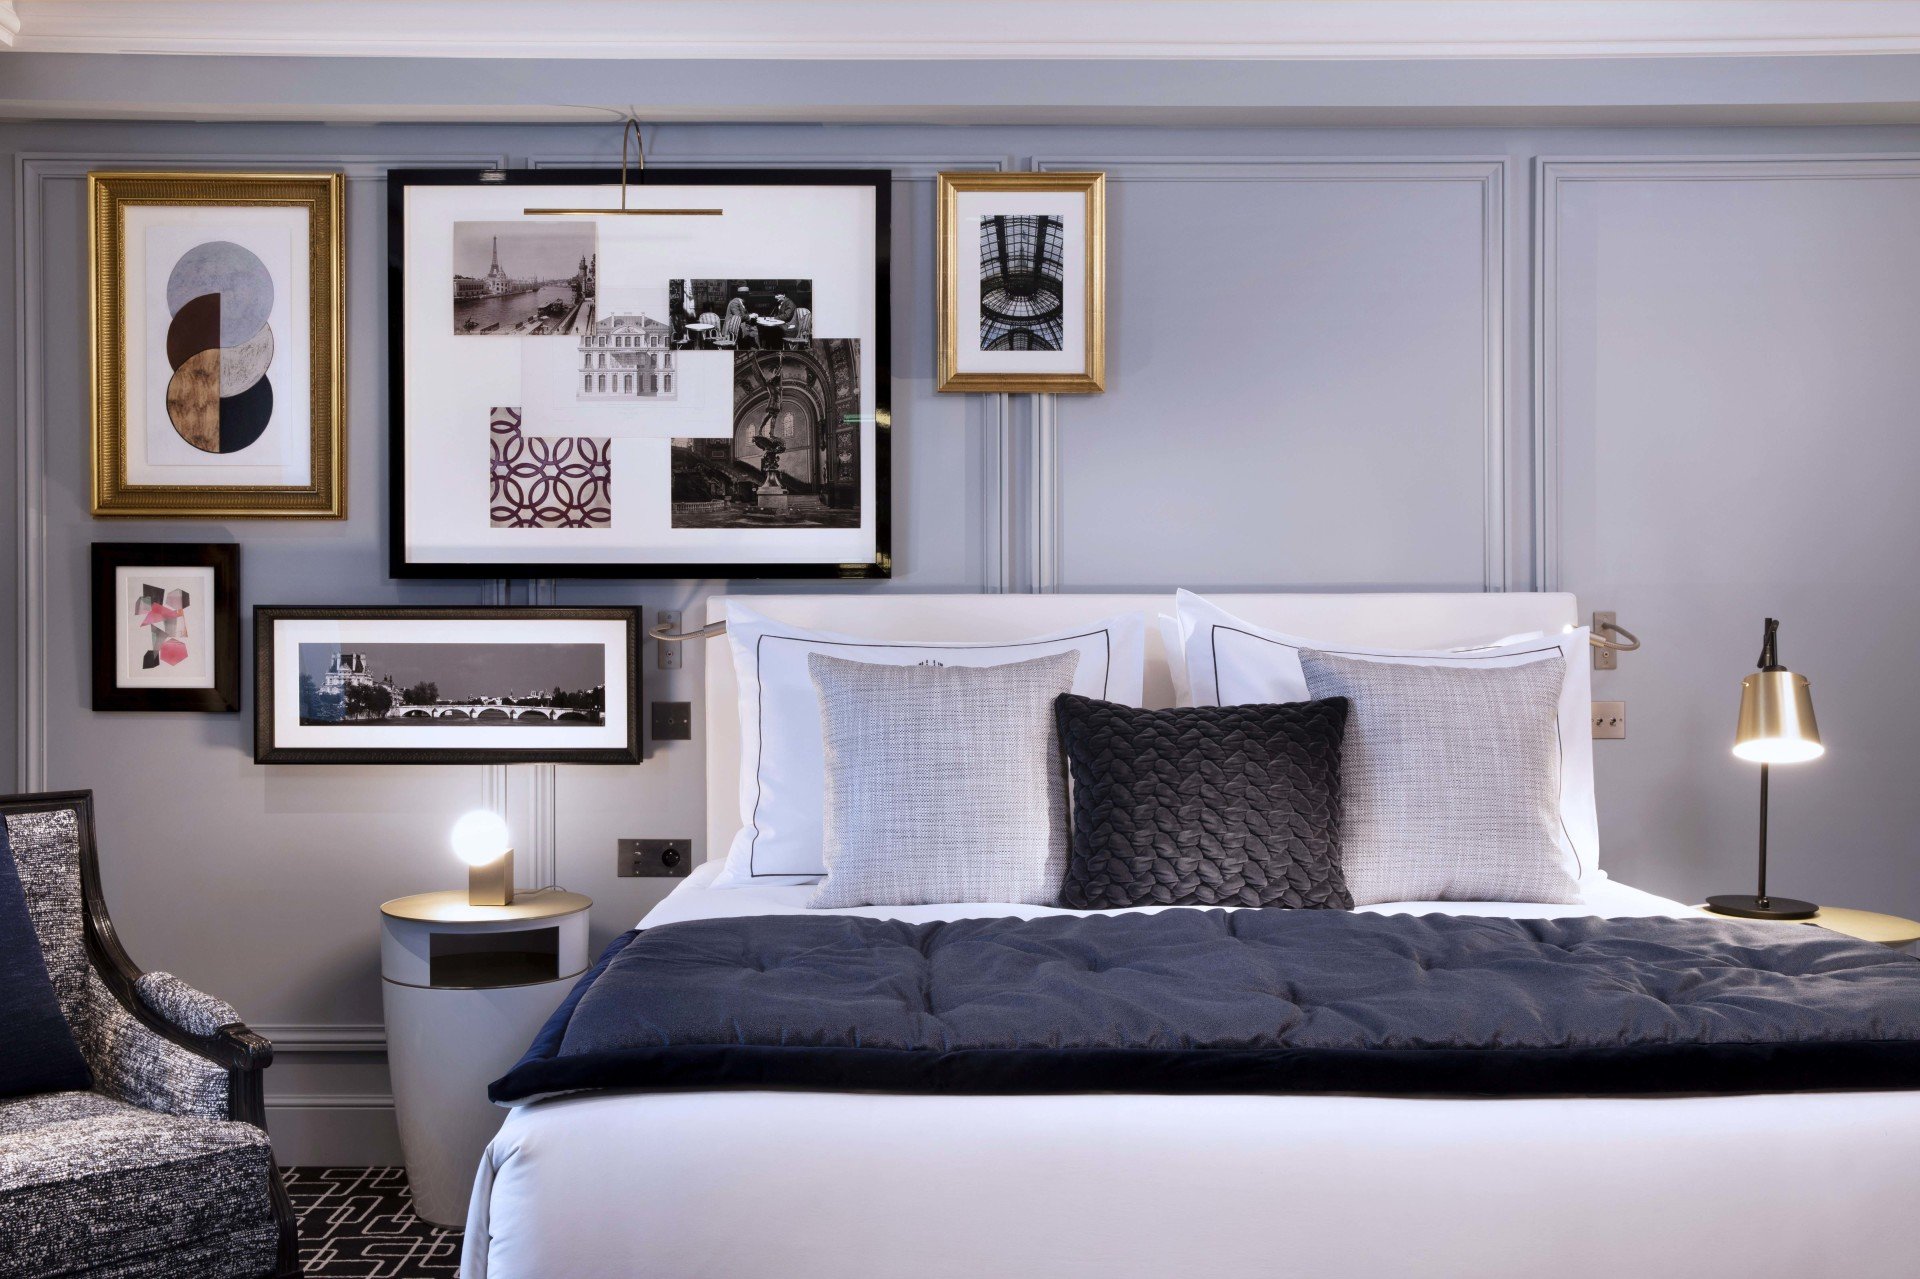 Hotel and Spa Le Damantin Paris - luxury hotel designed by the interior design studio jean-philippe nuel - design room equipped with bed, design armchair - artworks, paintings, Parisian room